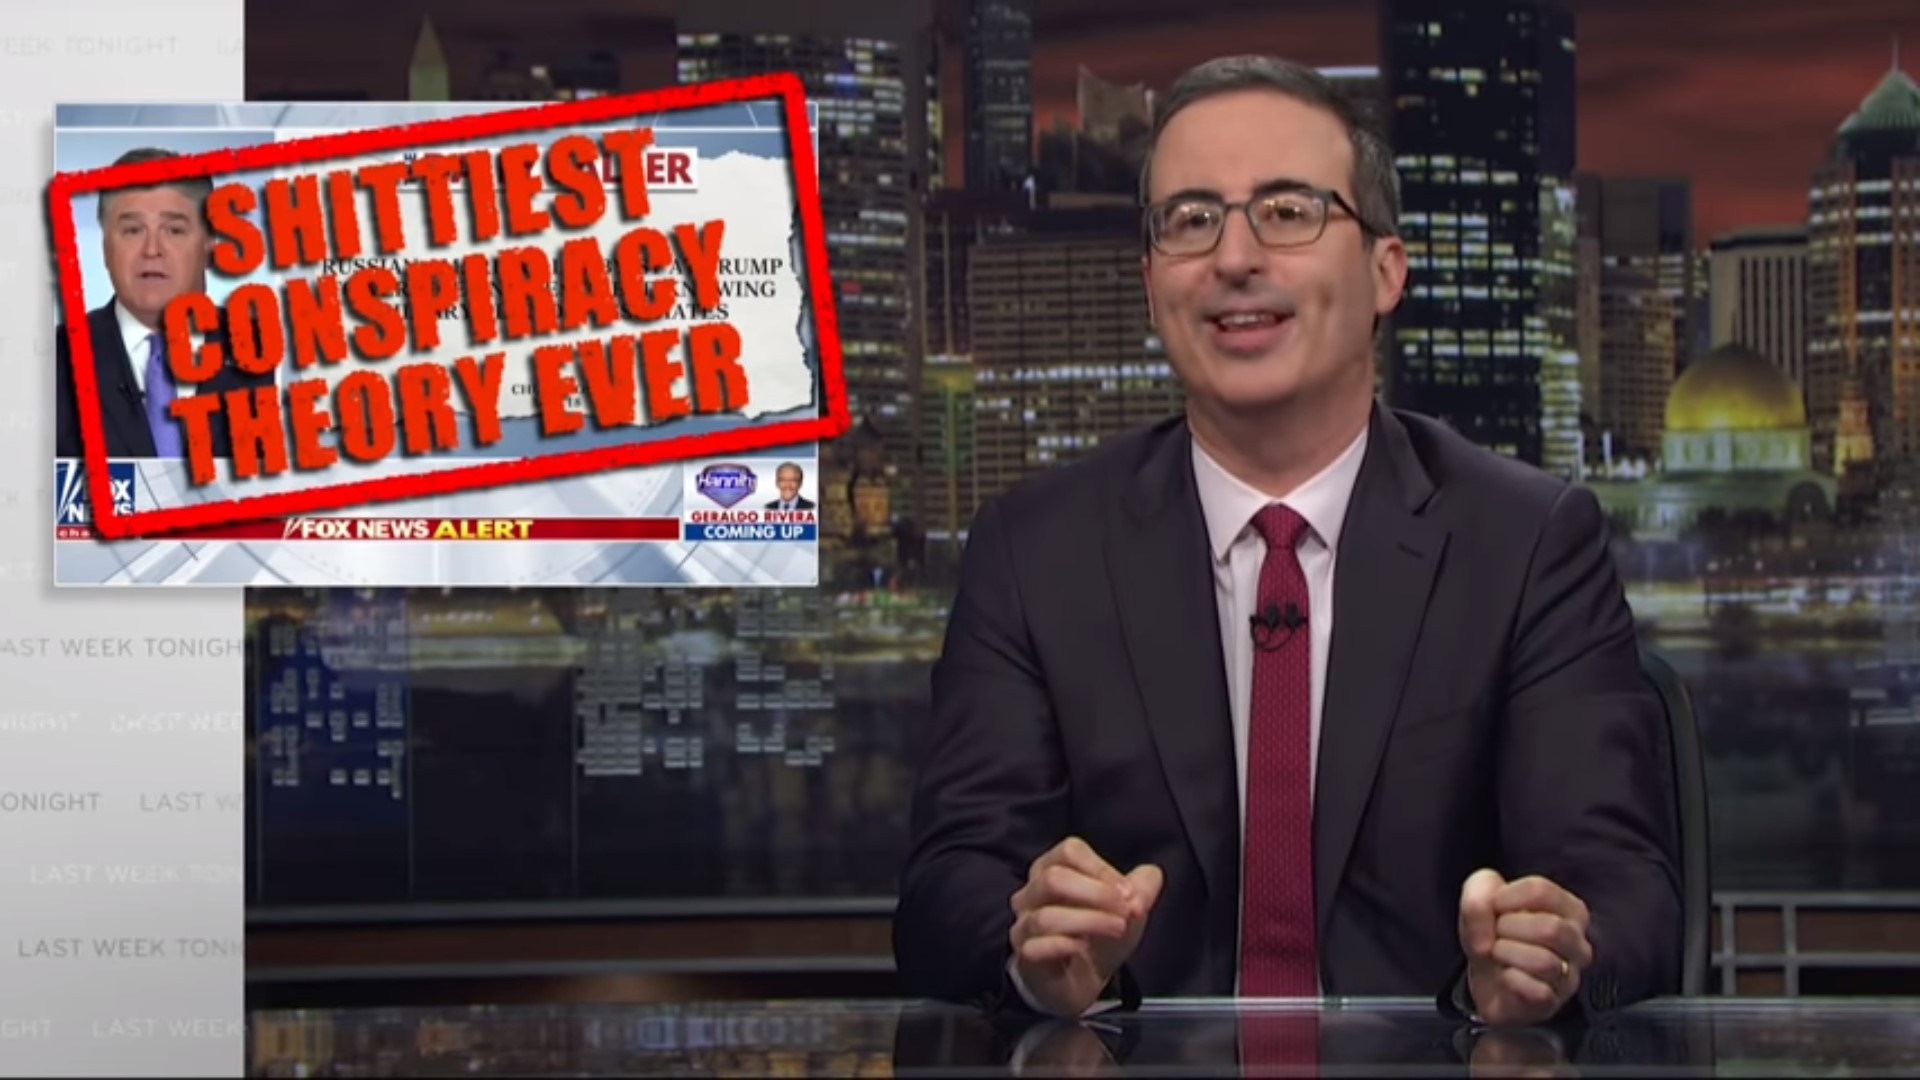 John Oliver Tears Into Sean Hannity For Pushing The ‘Sh*ttiest Conspiracy Theory Ever’